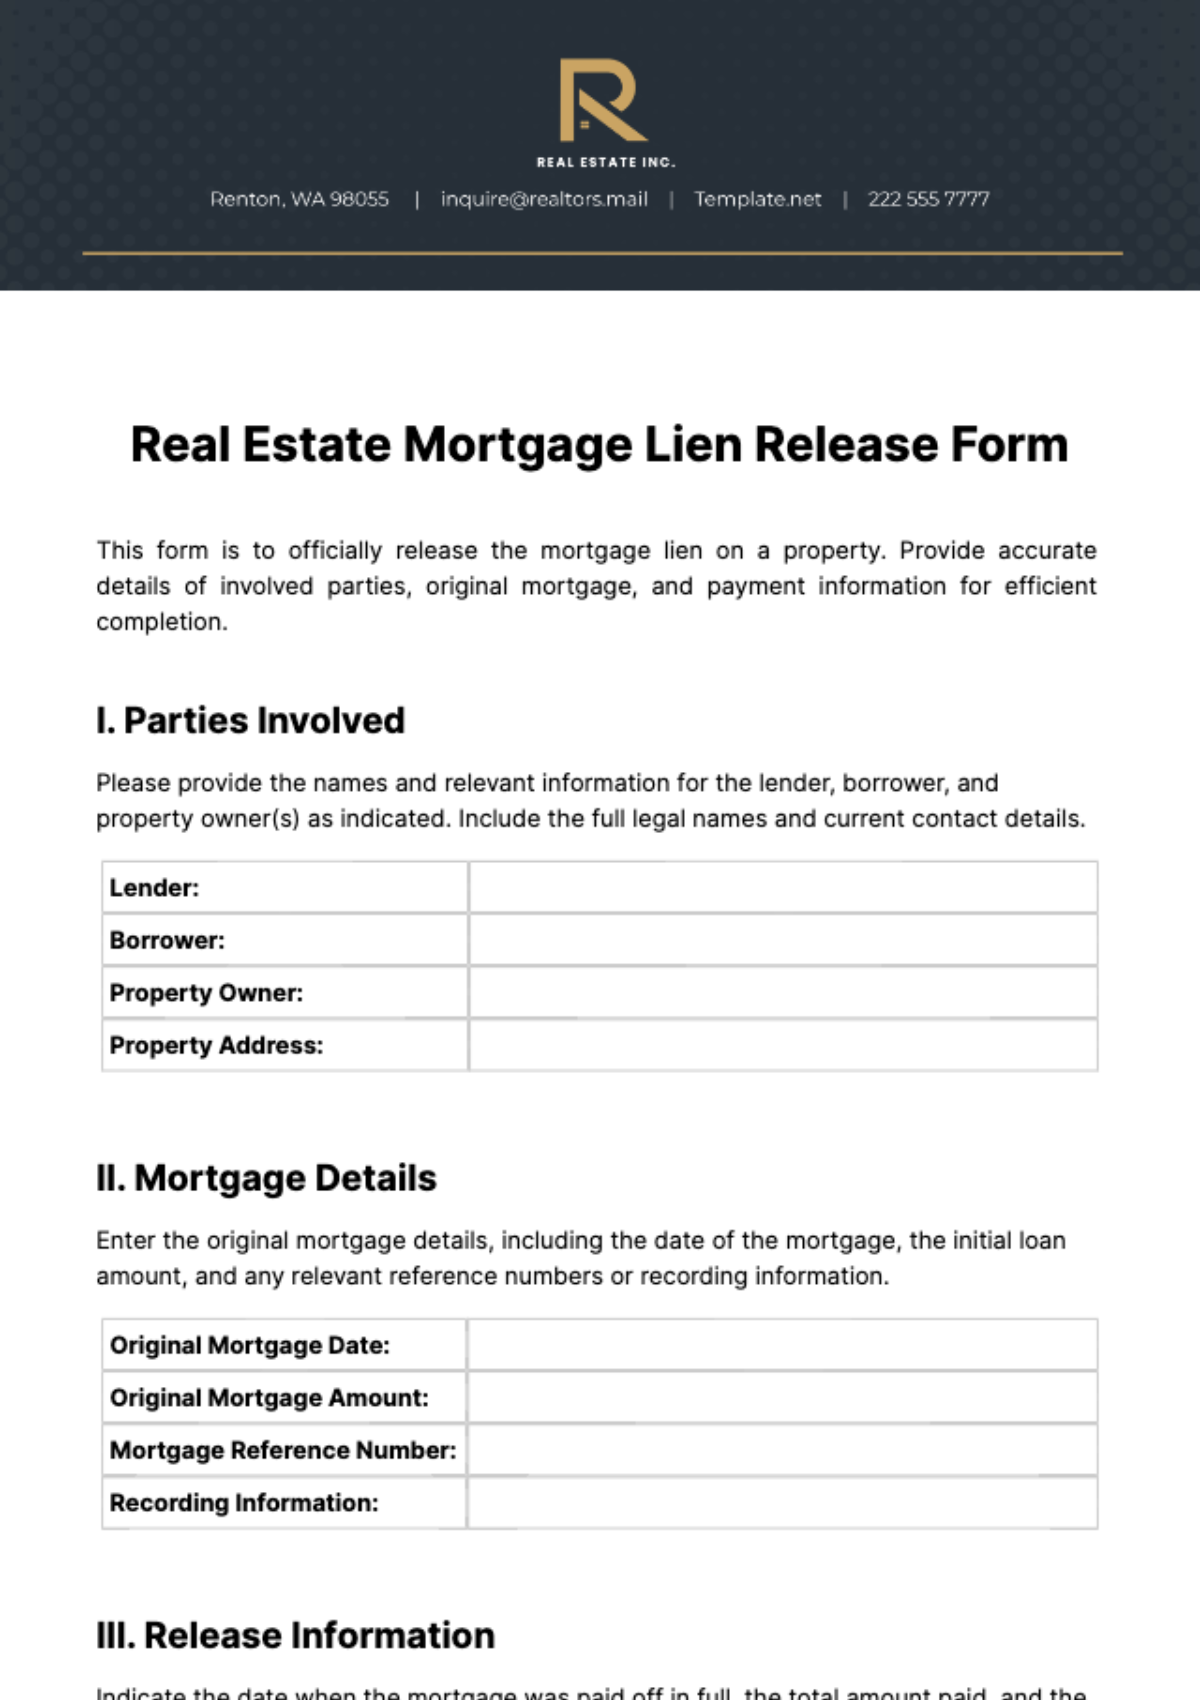 Real Estate Mortgage Lien Release Form Template